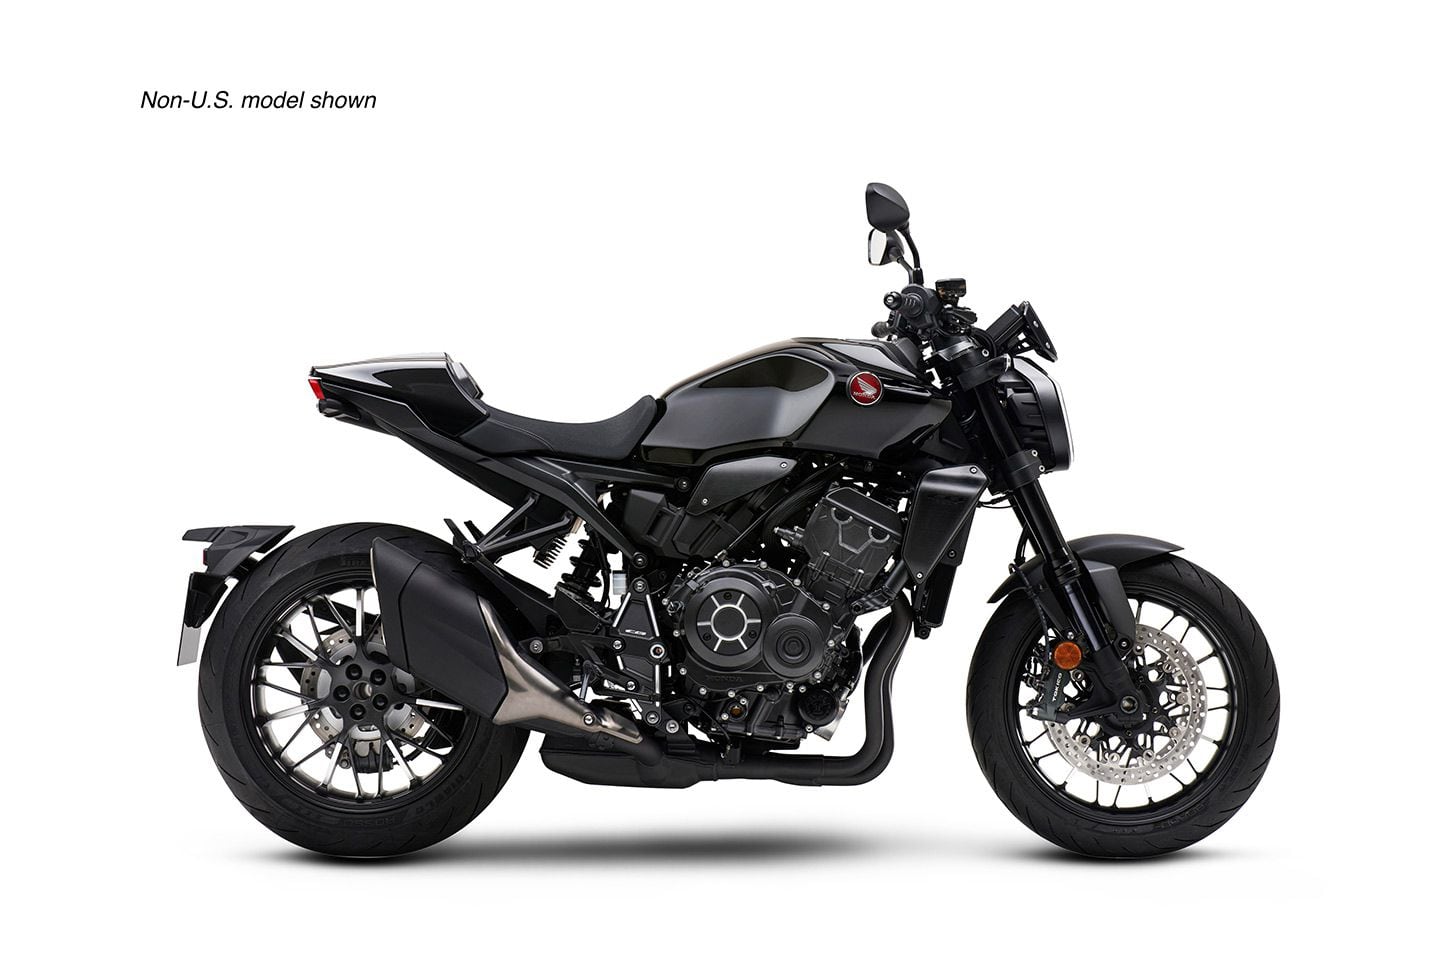 Honda’s CB1000R Black Edition is affordable and offers a smooth, sporty ride to any who want to swing a leg over.